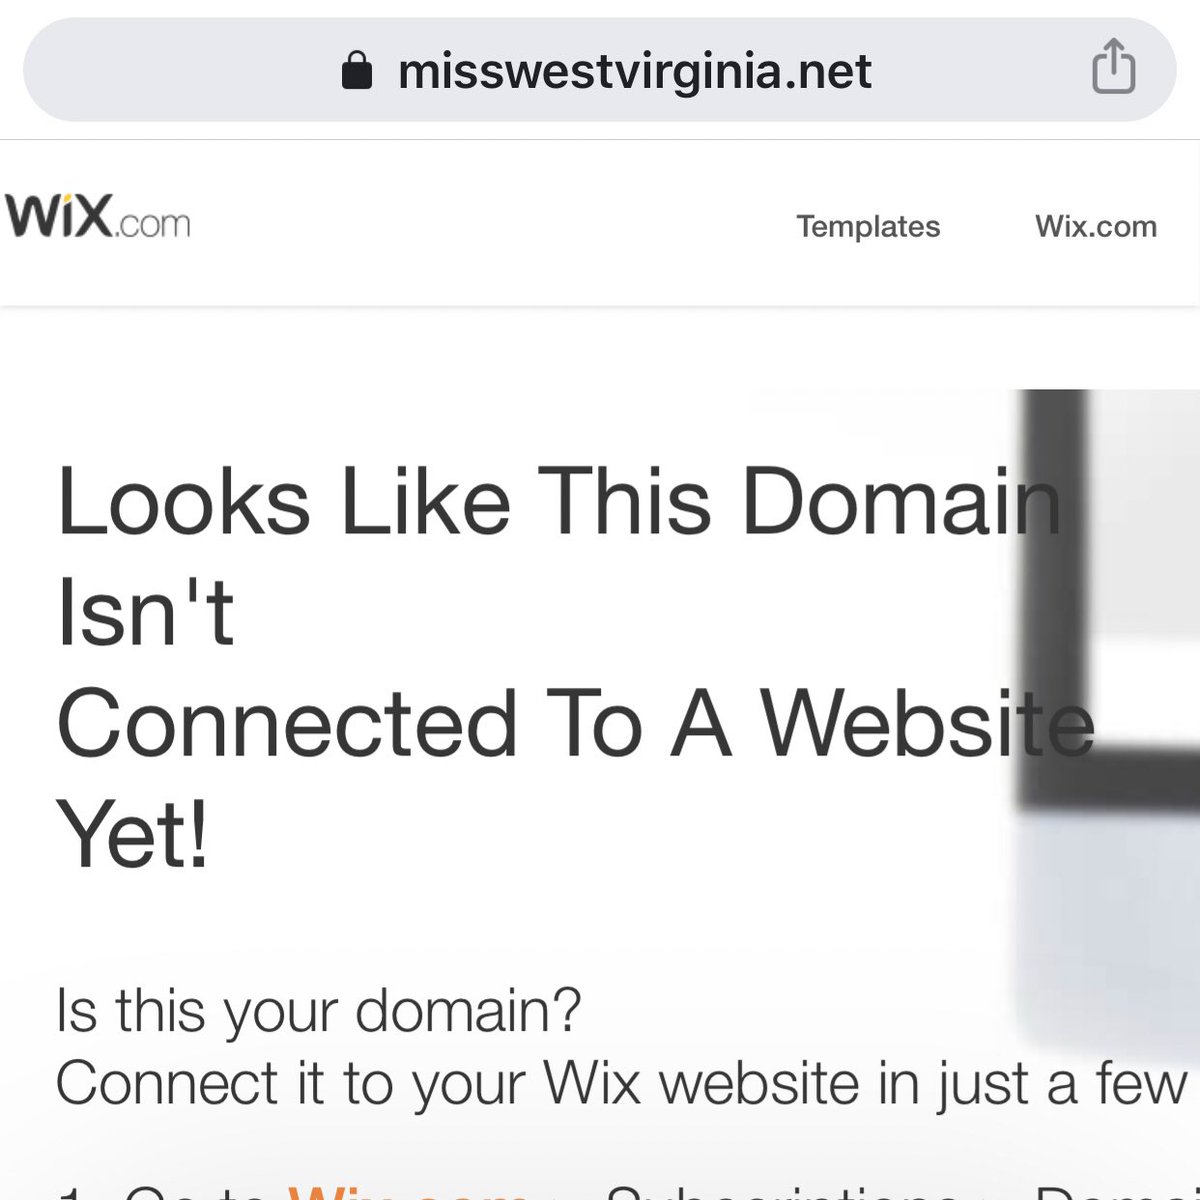 And yet, this oversight doesn’t resolve itself.Wikipedia backs it up, quickly, but *official* records from “Miss West Virginia America Edition” don’t seem to exist. And the website listed on Wikipedia doesn’t exist.  https://en.wikipedia.org/wiki/Miss_West_VirginiaPatsy Ramsey, at Miss America 1977.